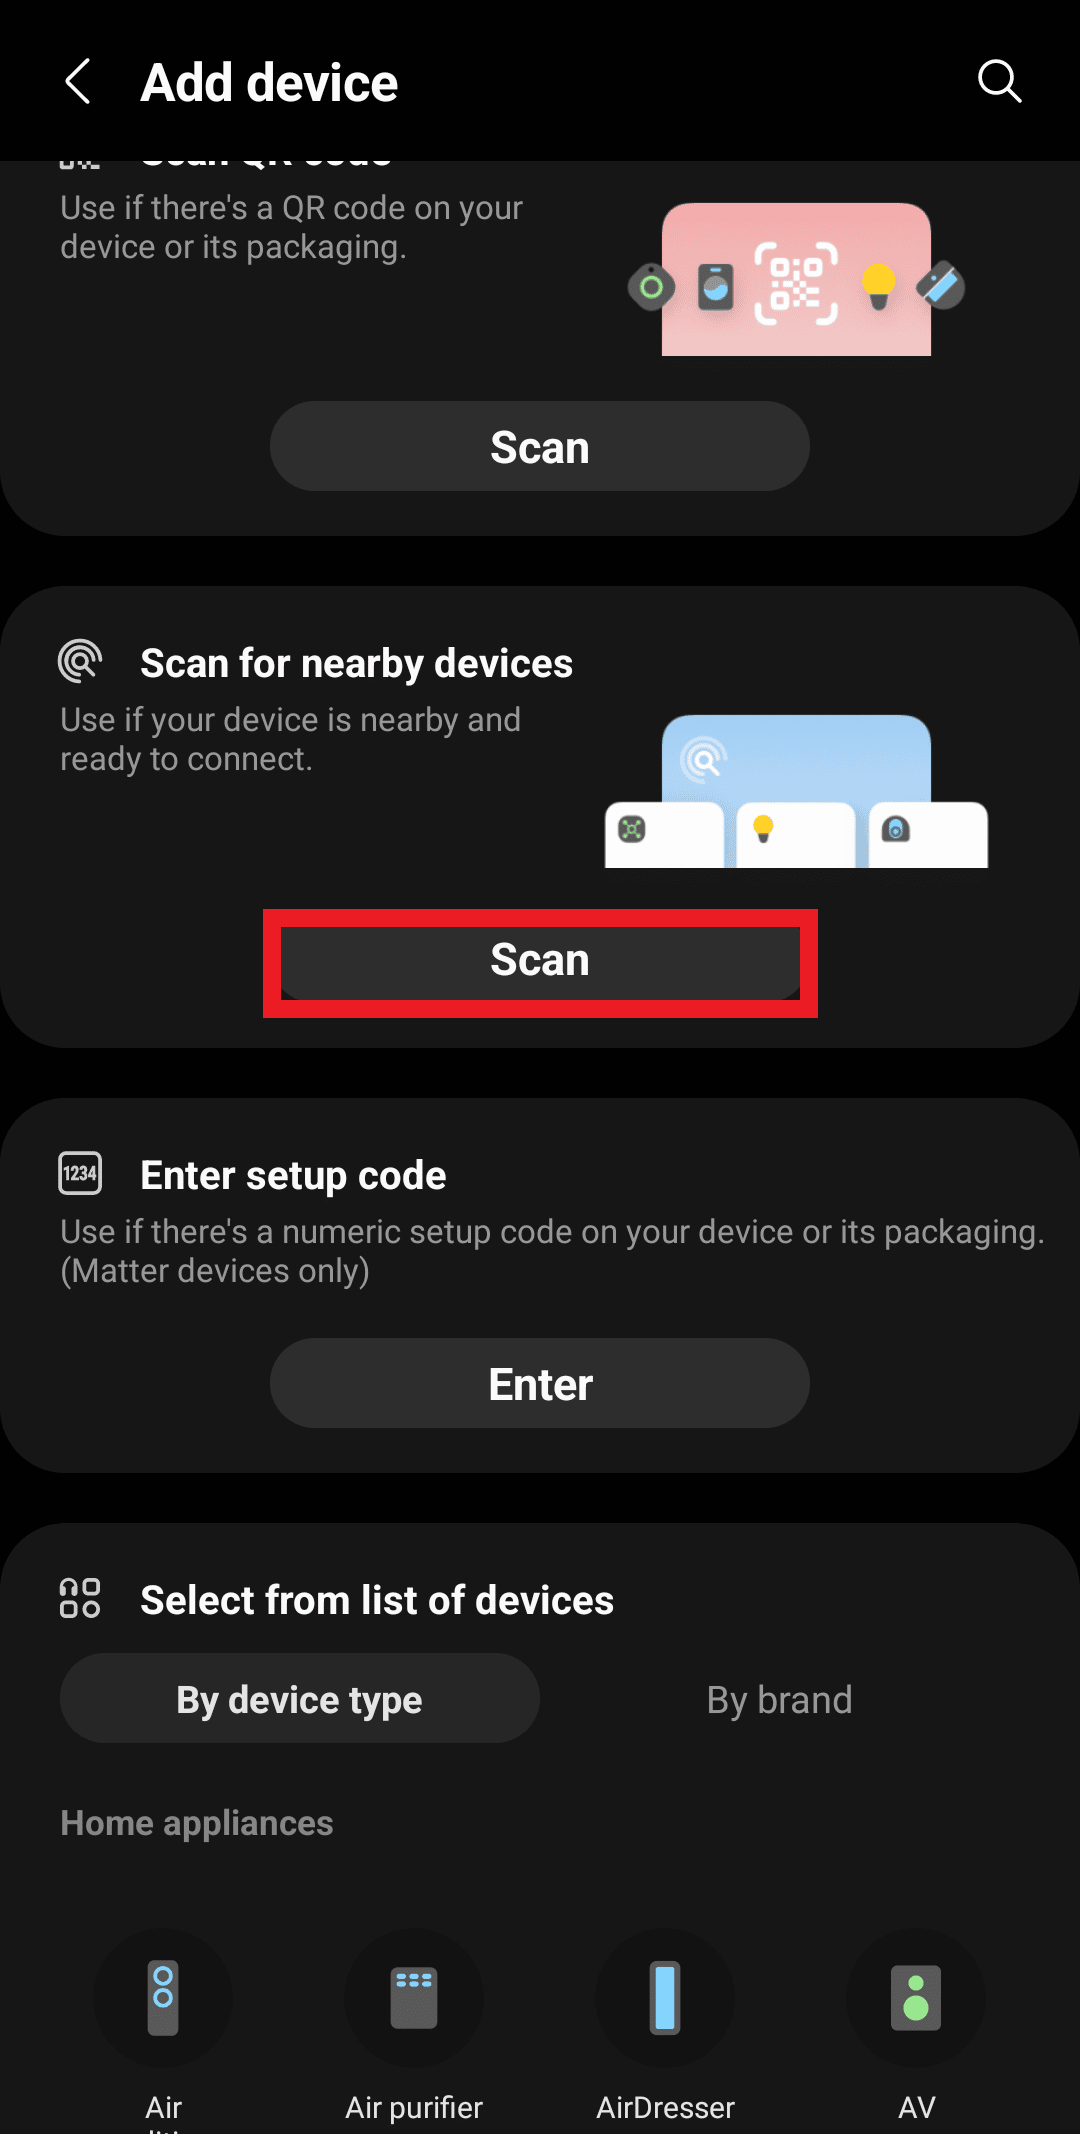 tap on scan below scan for nearby devices 